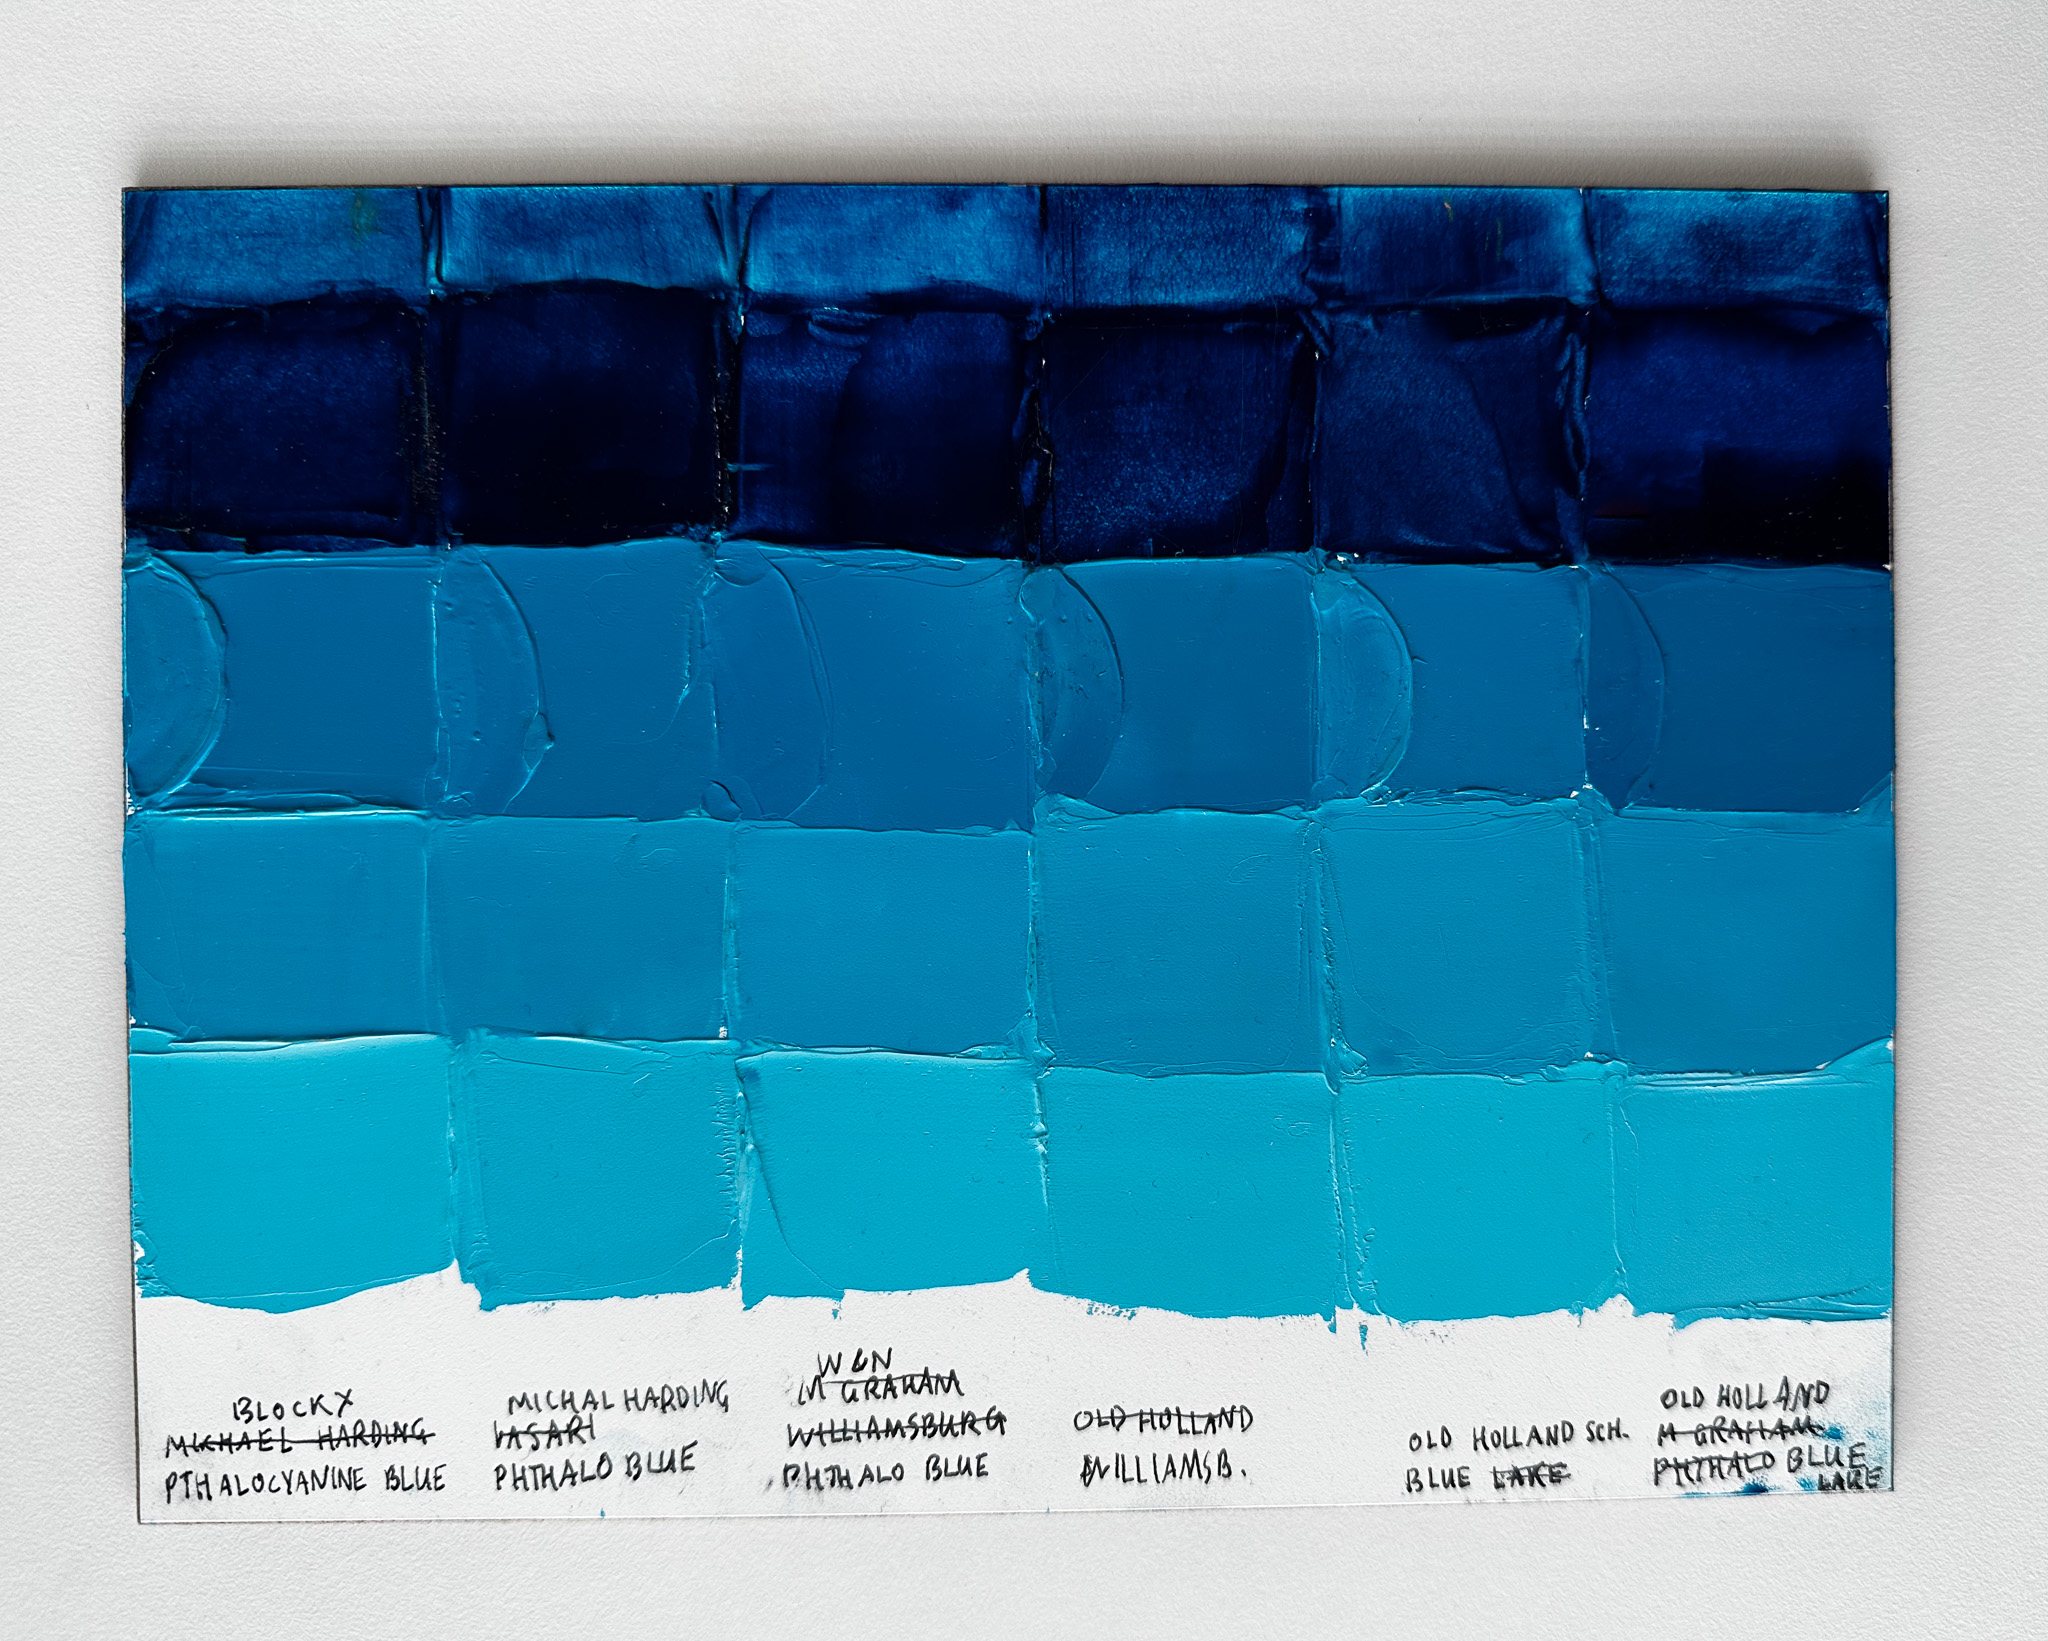 Color comparisons of several different artist paints made of phthalo blue green shade. Brands shown are Blockx, Michael Harding, Winsor and Newton, Williamsburg, and two paints from Old Holland